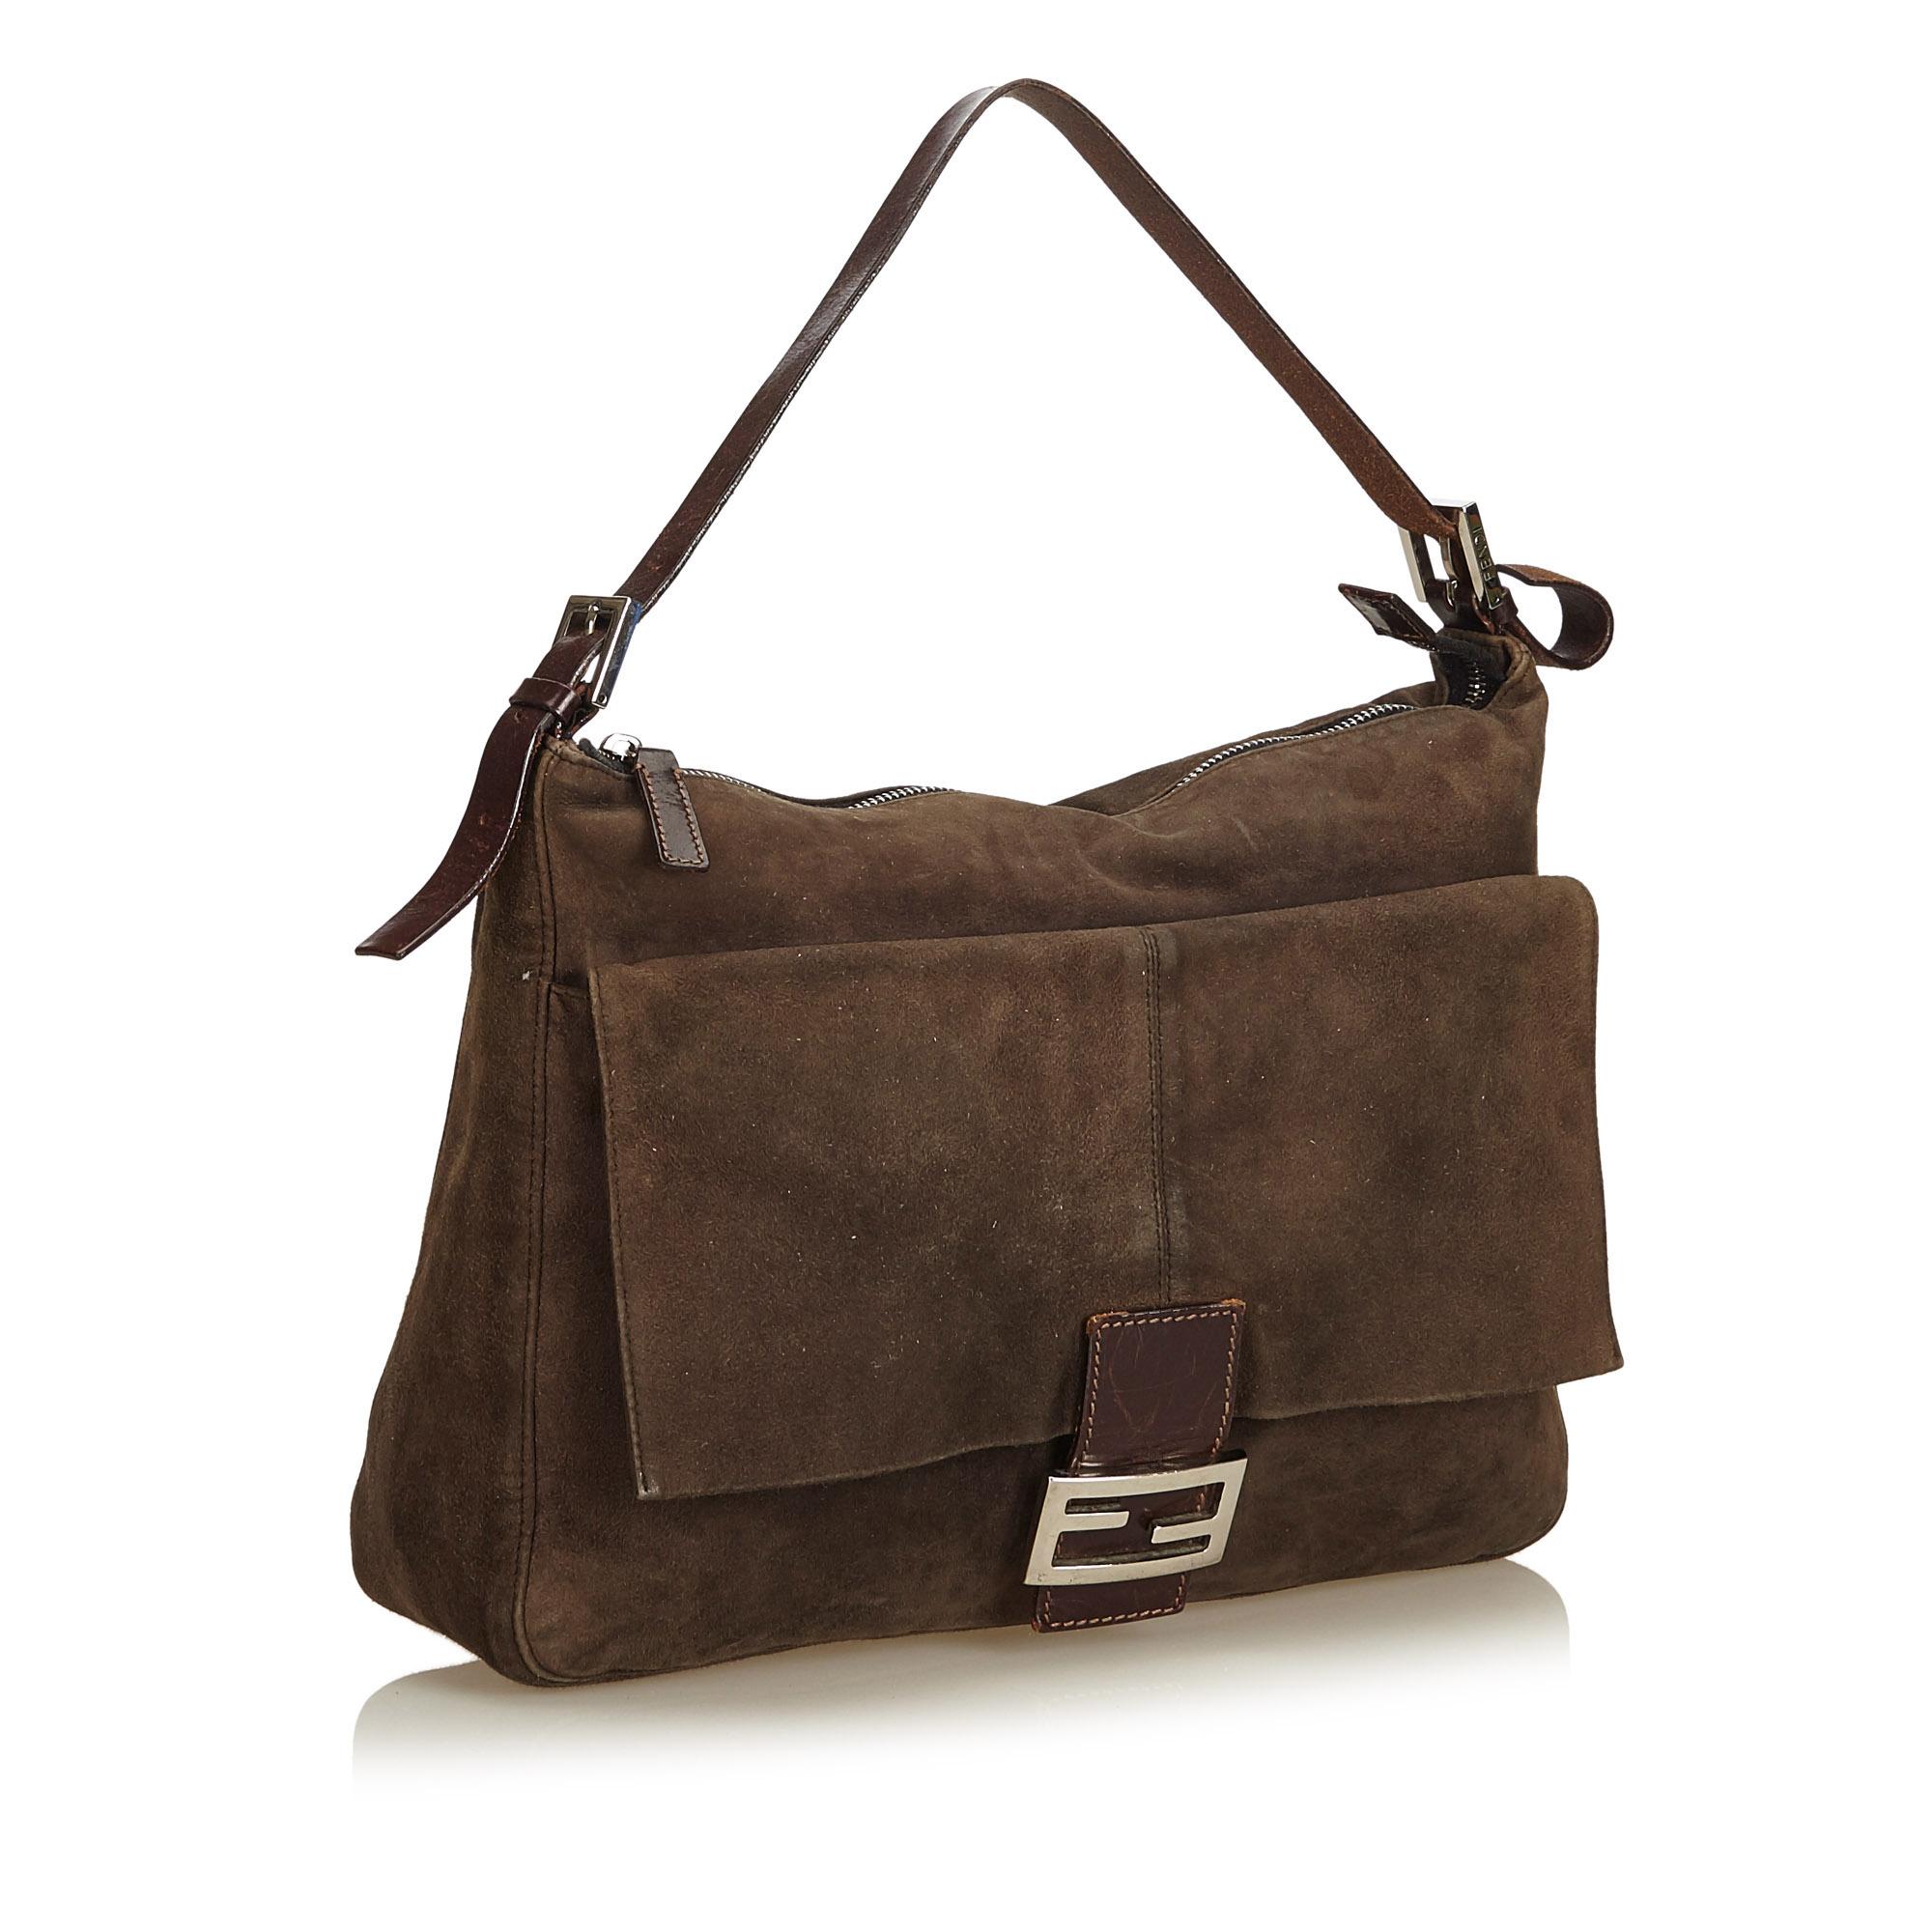 This Mamma Forever features a suede body, flat leather strap, top zip closure, exterior flap pocket with flat leather strap and magnetic snap button closure, and interior zip pocket.

It carries a B+ condition rating.

Dimensions: 
Length 26.00